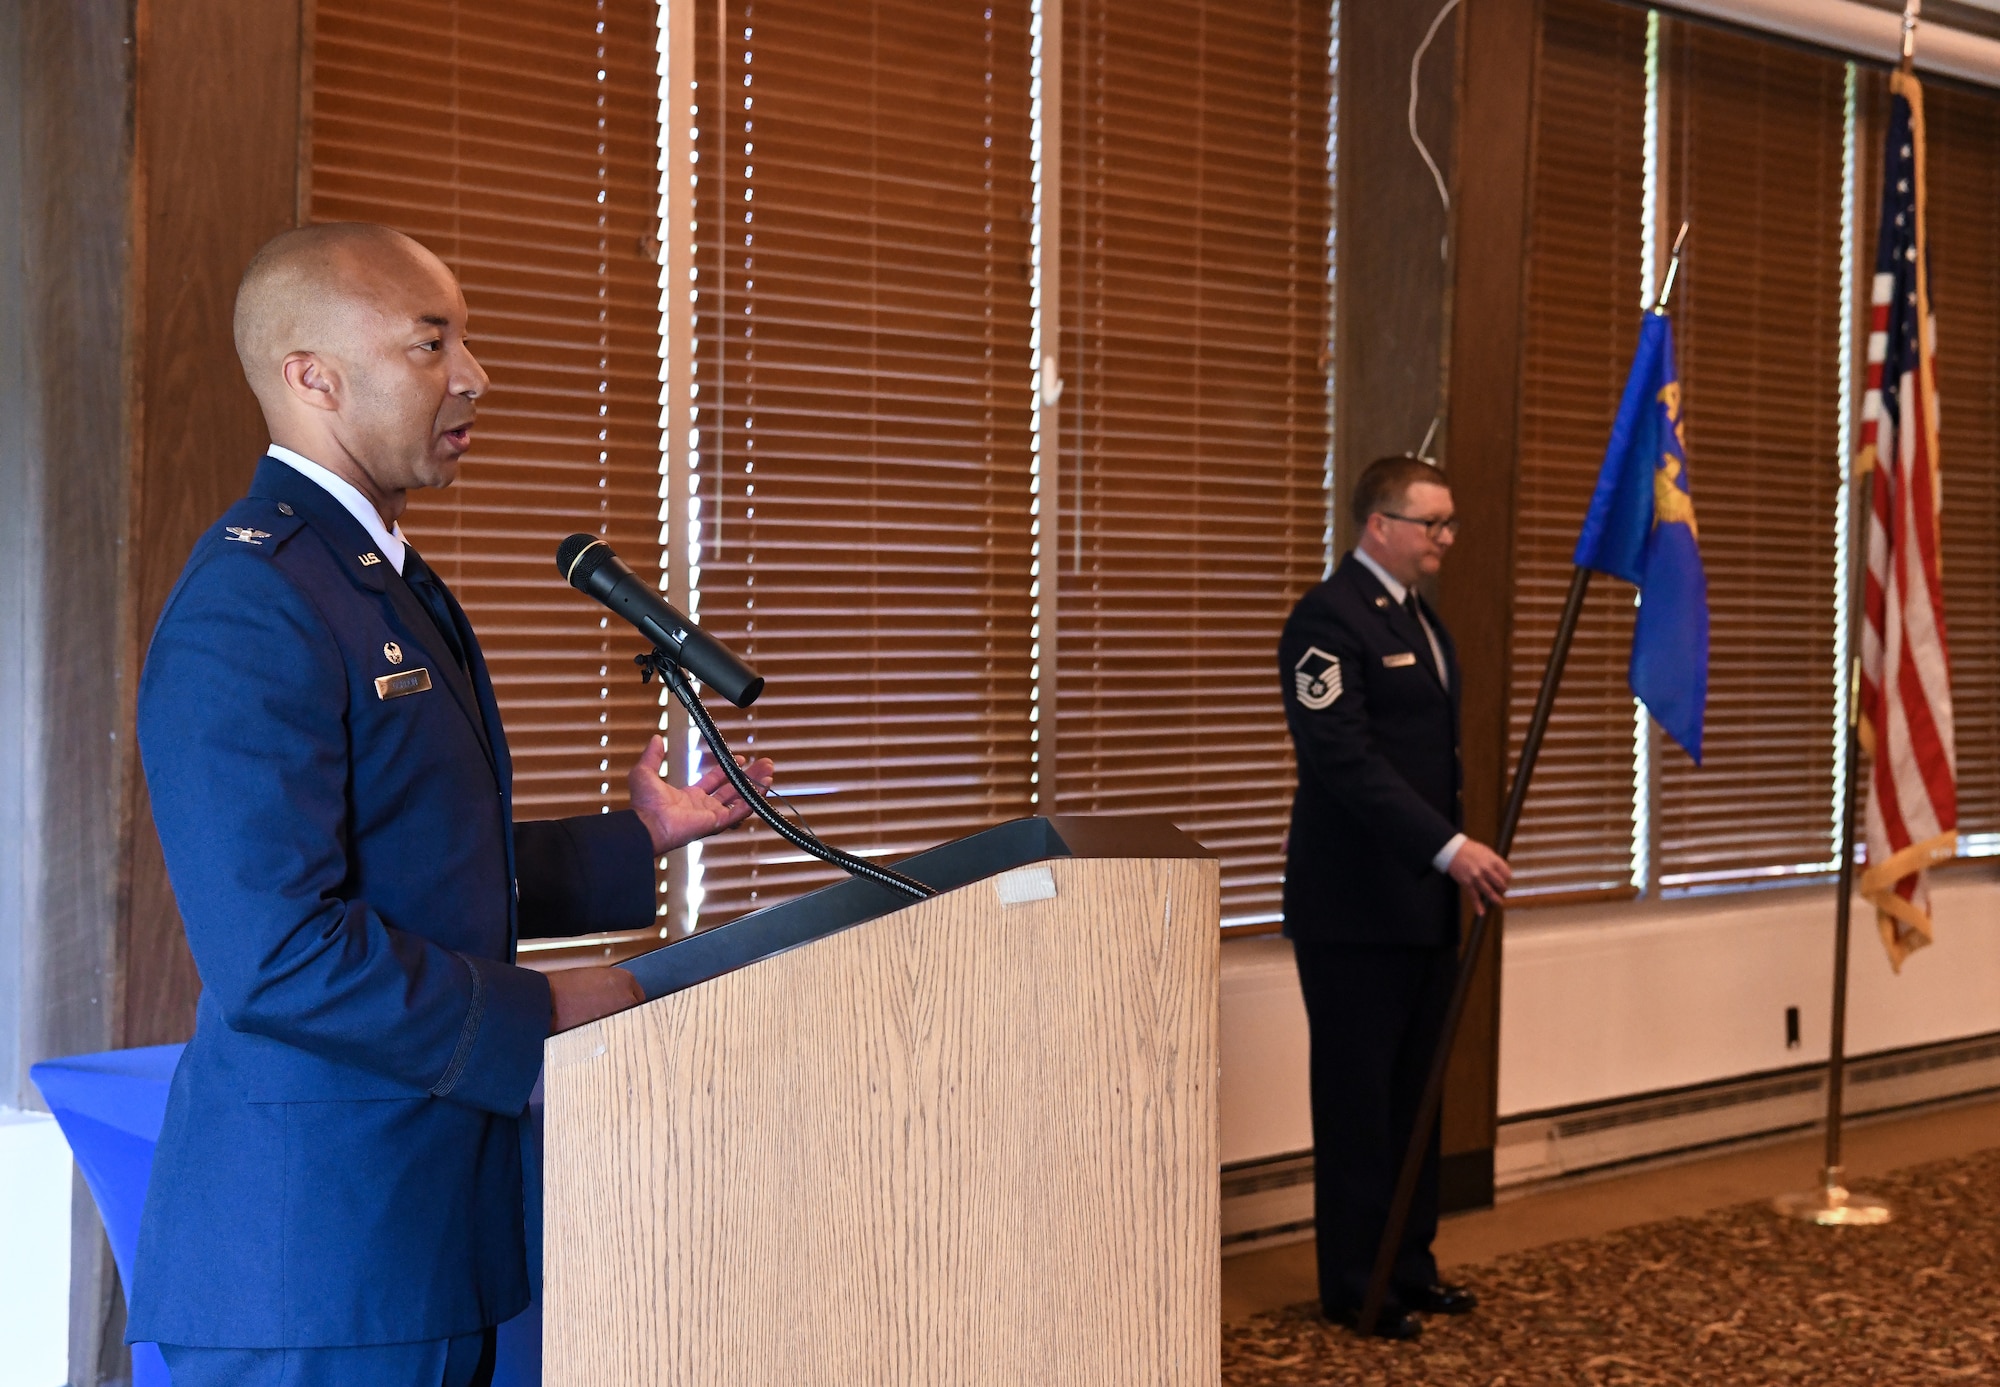 Col. Randel Gordon, Arnold Engineering Development Complex commander, speaks during the change of leadership ceremony for the Test Support Division, AEDC, at Arnold Air Force Base, Tenn., June 2, 2023. Col. R. Chris Lance relinquished leadership and Lt. Col. Eric Withrow assumed leadership of the division. (U.S. Air Force photo by Jill Pickett)